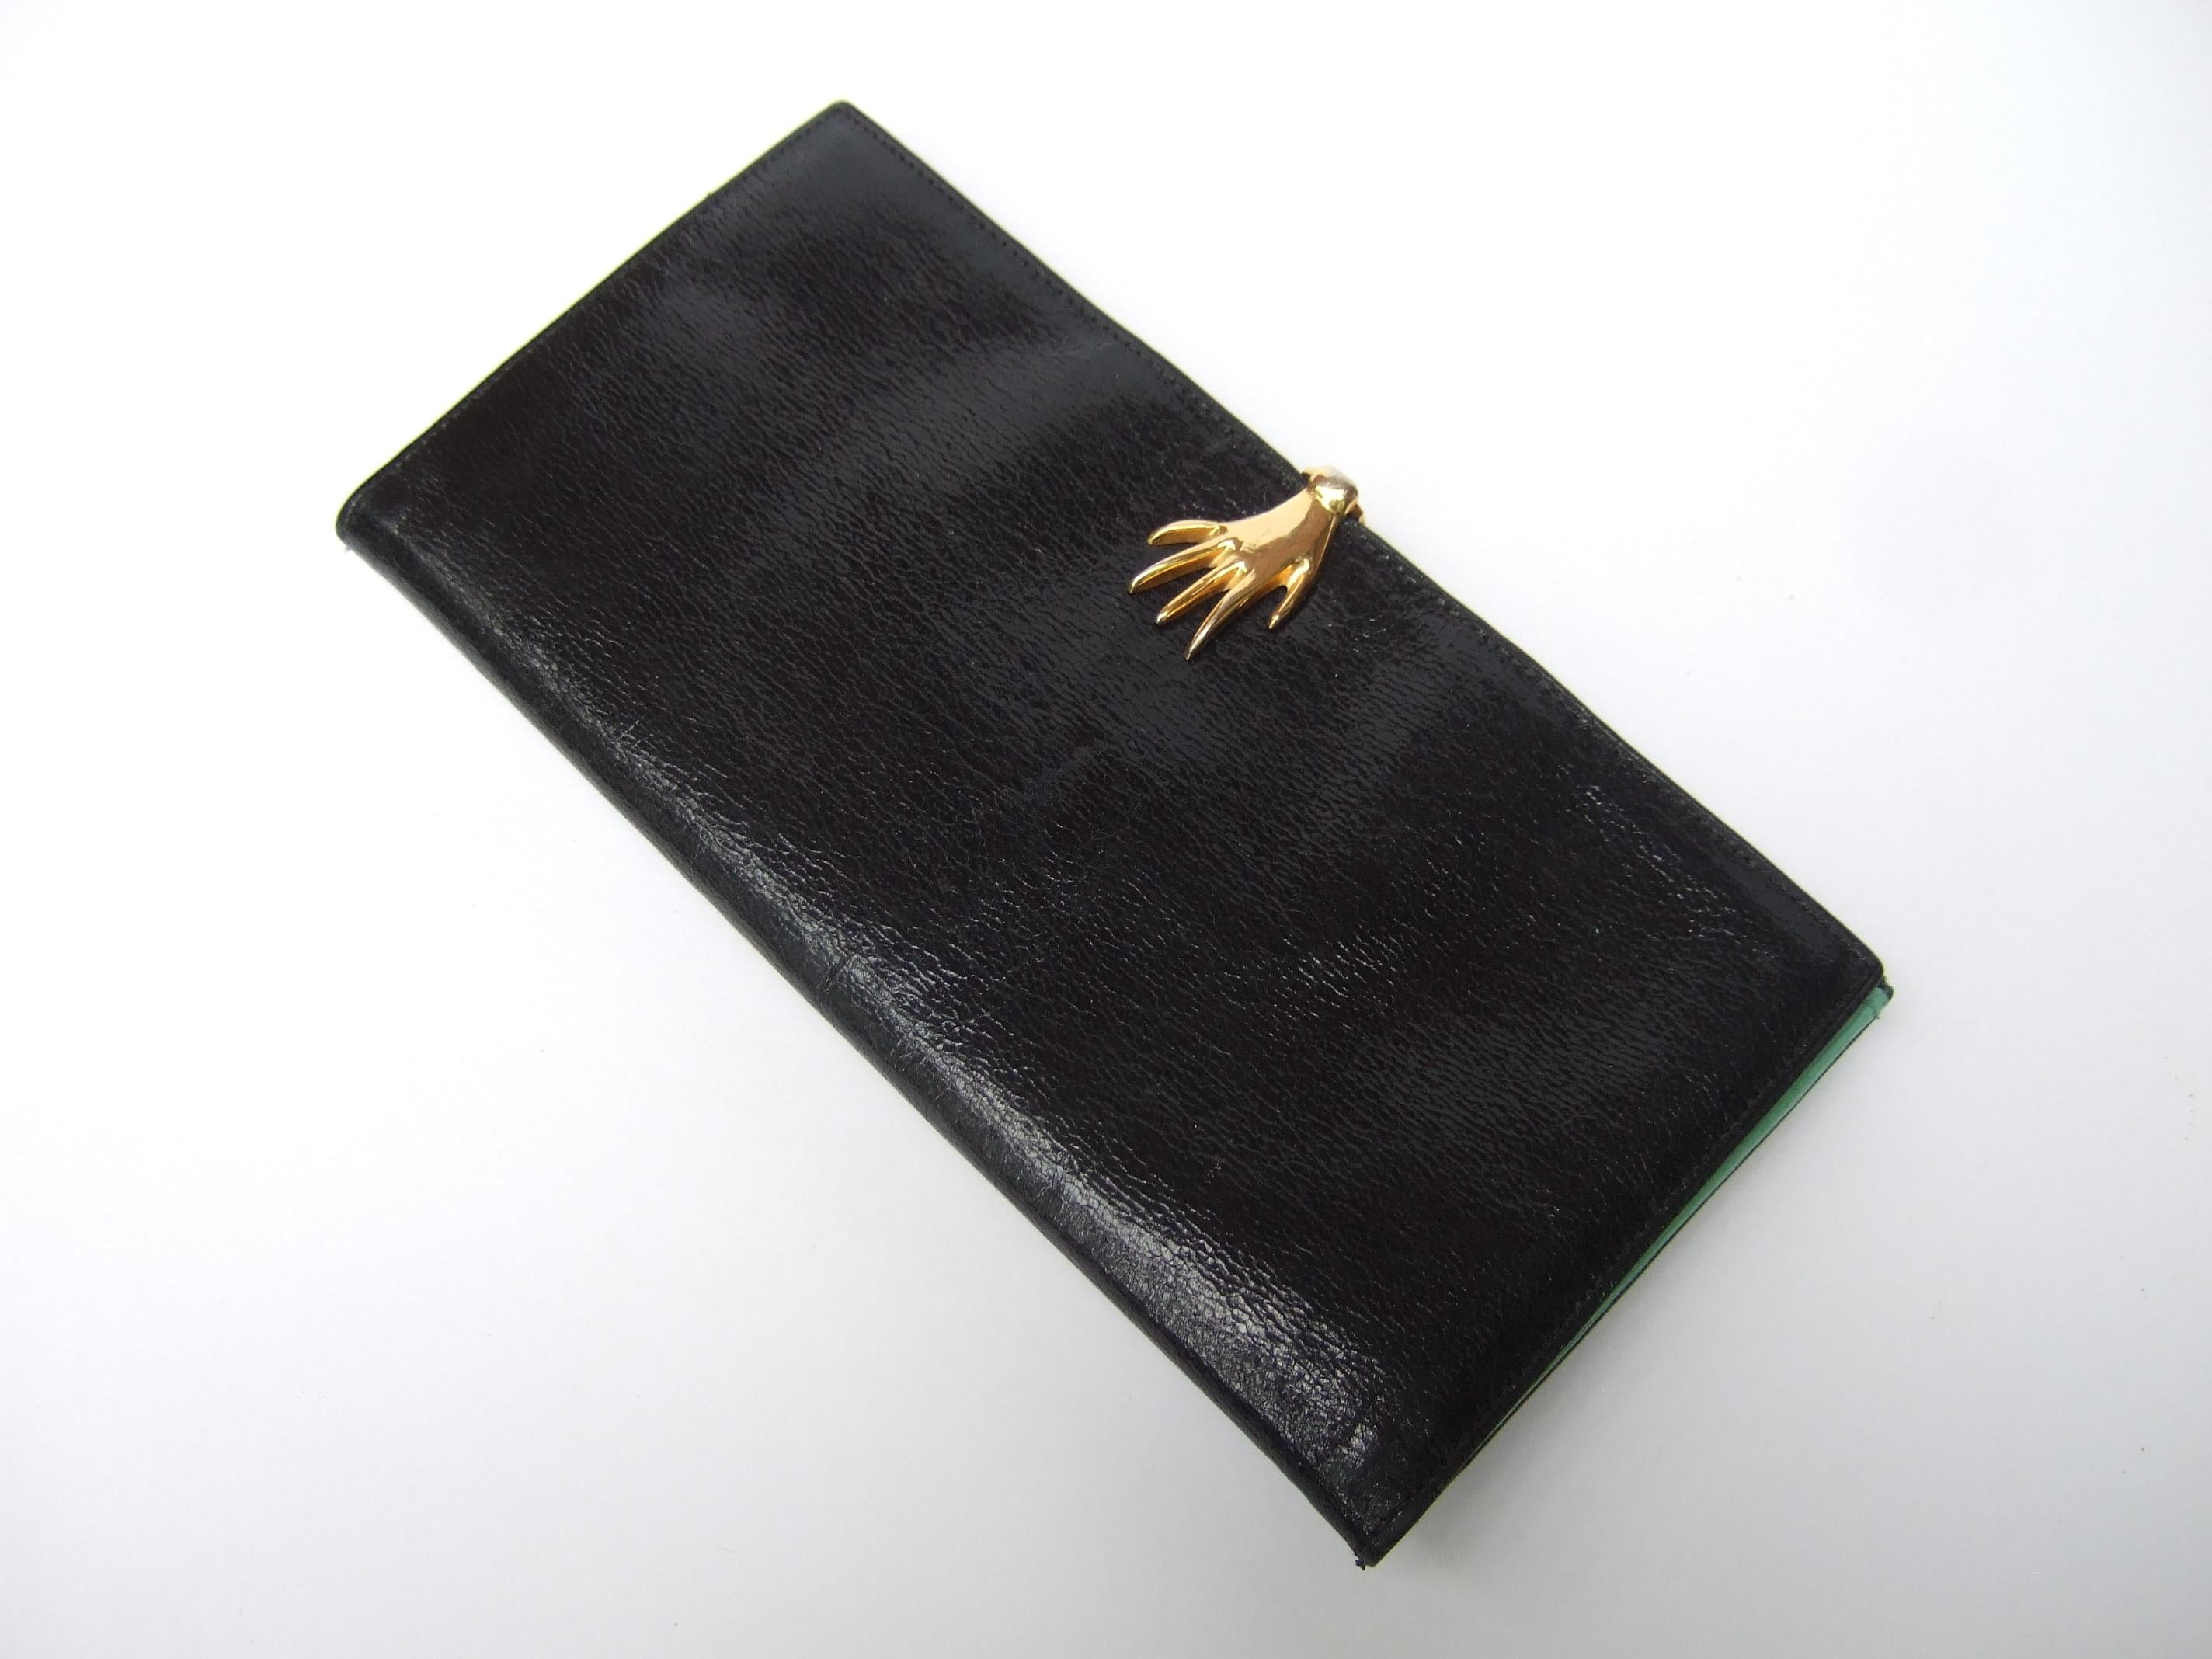 Gucci Italy Rare Black Leather Hand Clasp Wallet c 1970s 1